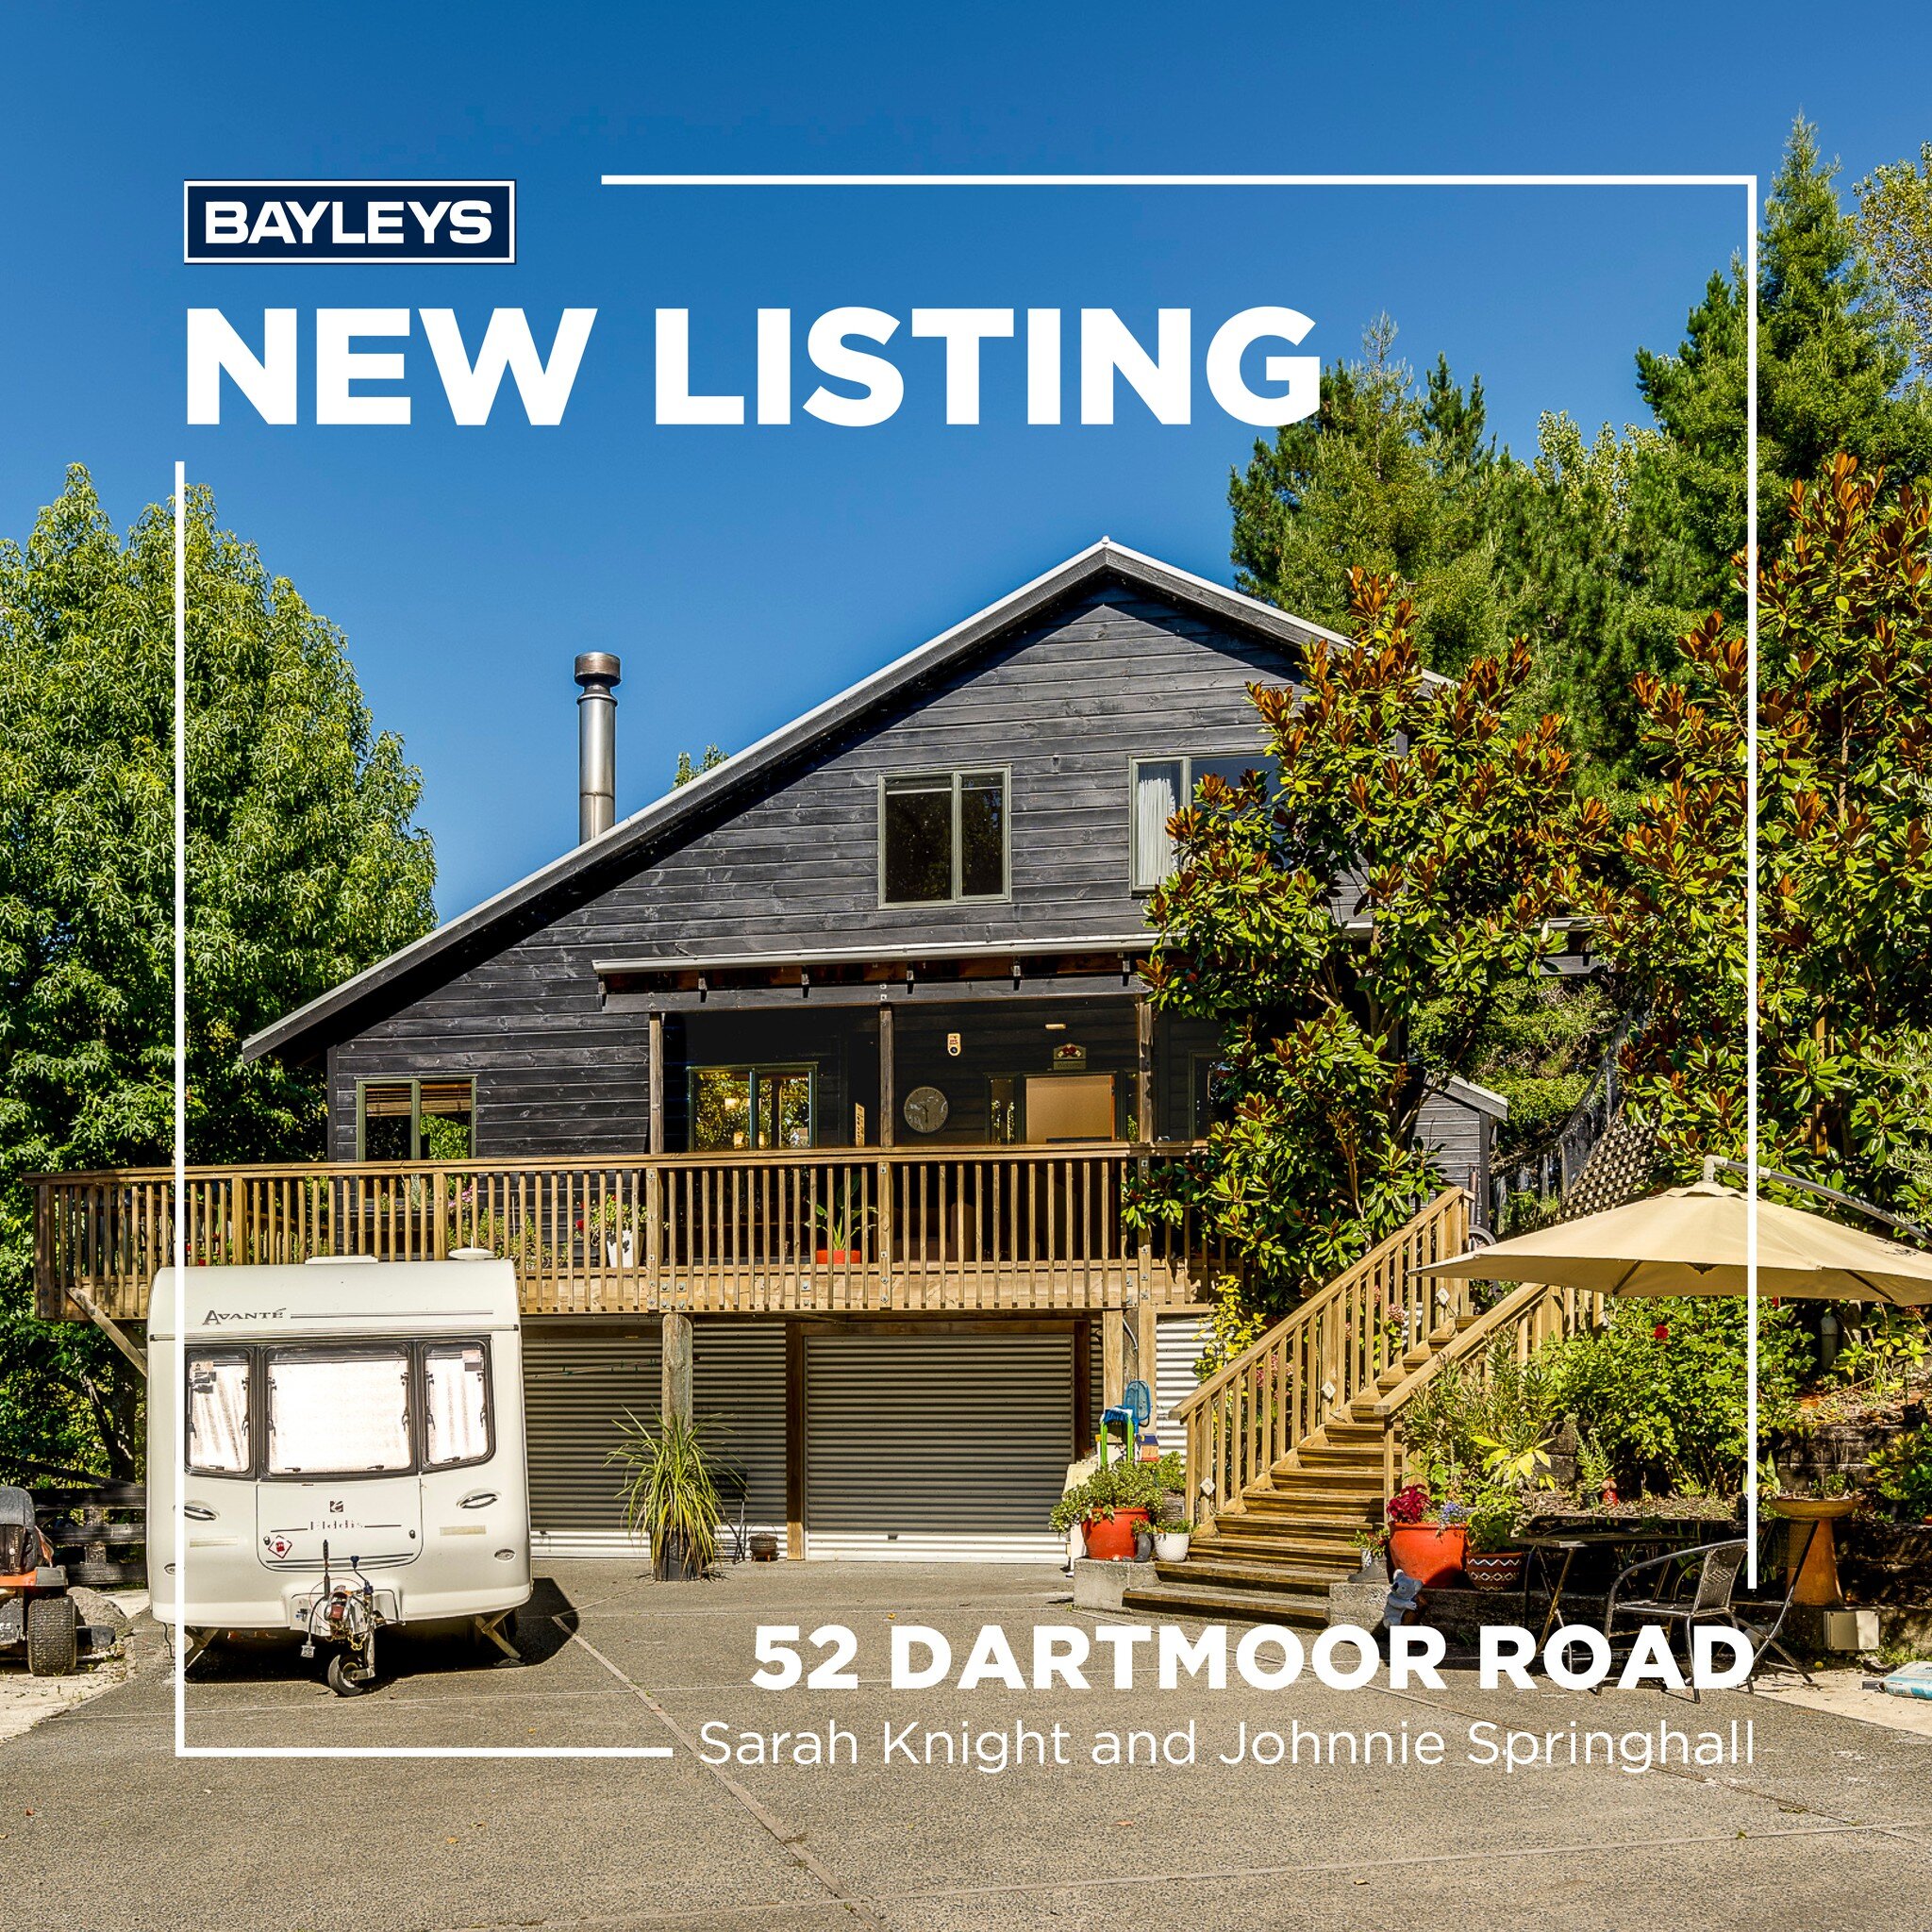 Cocka-doodle-doo, Puketapu calling you | 52 Dartmoor Road, Puketapu🏡

It is time to get those red bands you've been dreaming of and head for the hills - and we've got just the property for you!

bayleys.co.nz/2802560